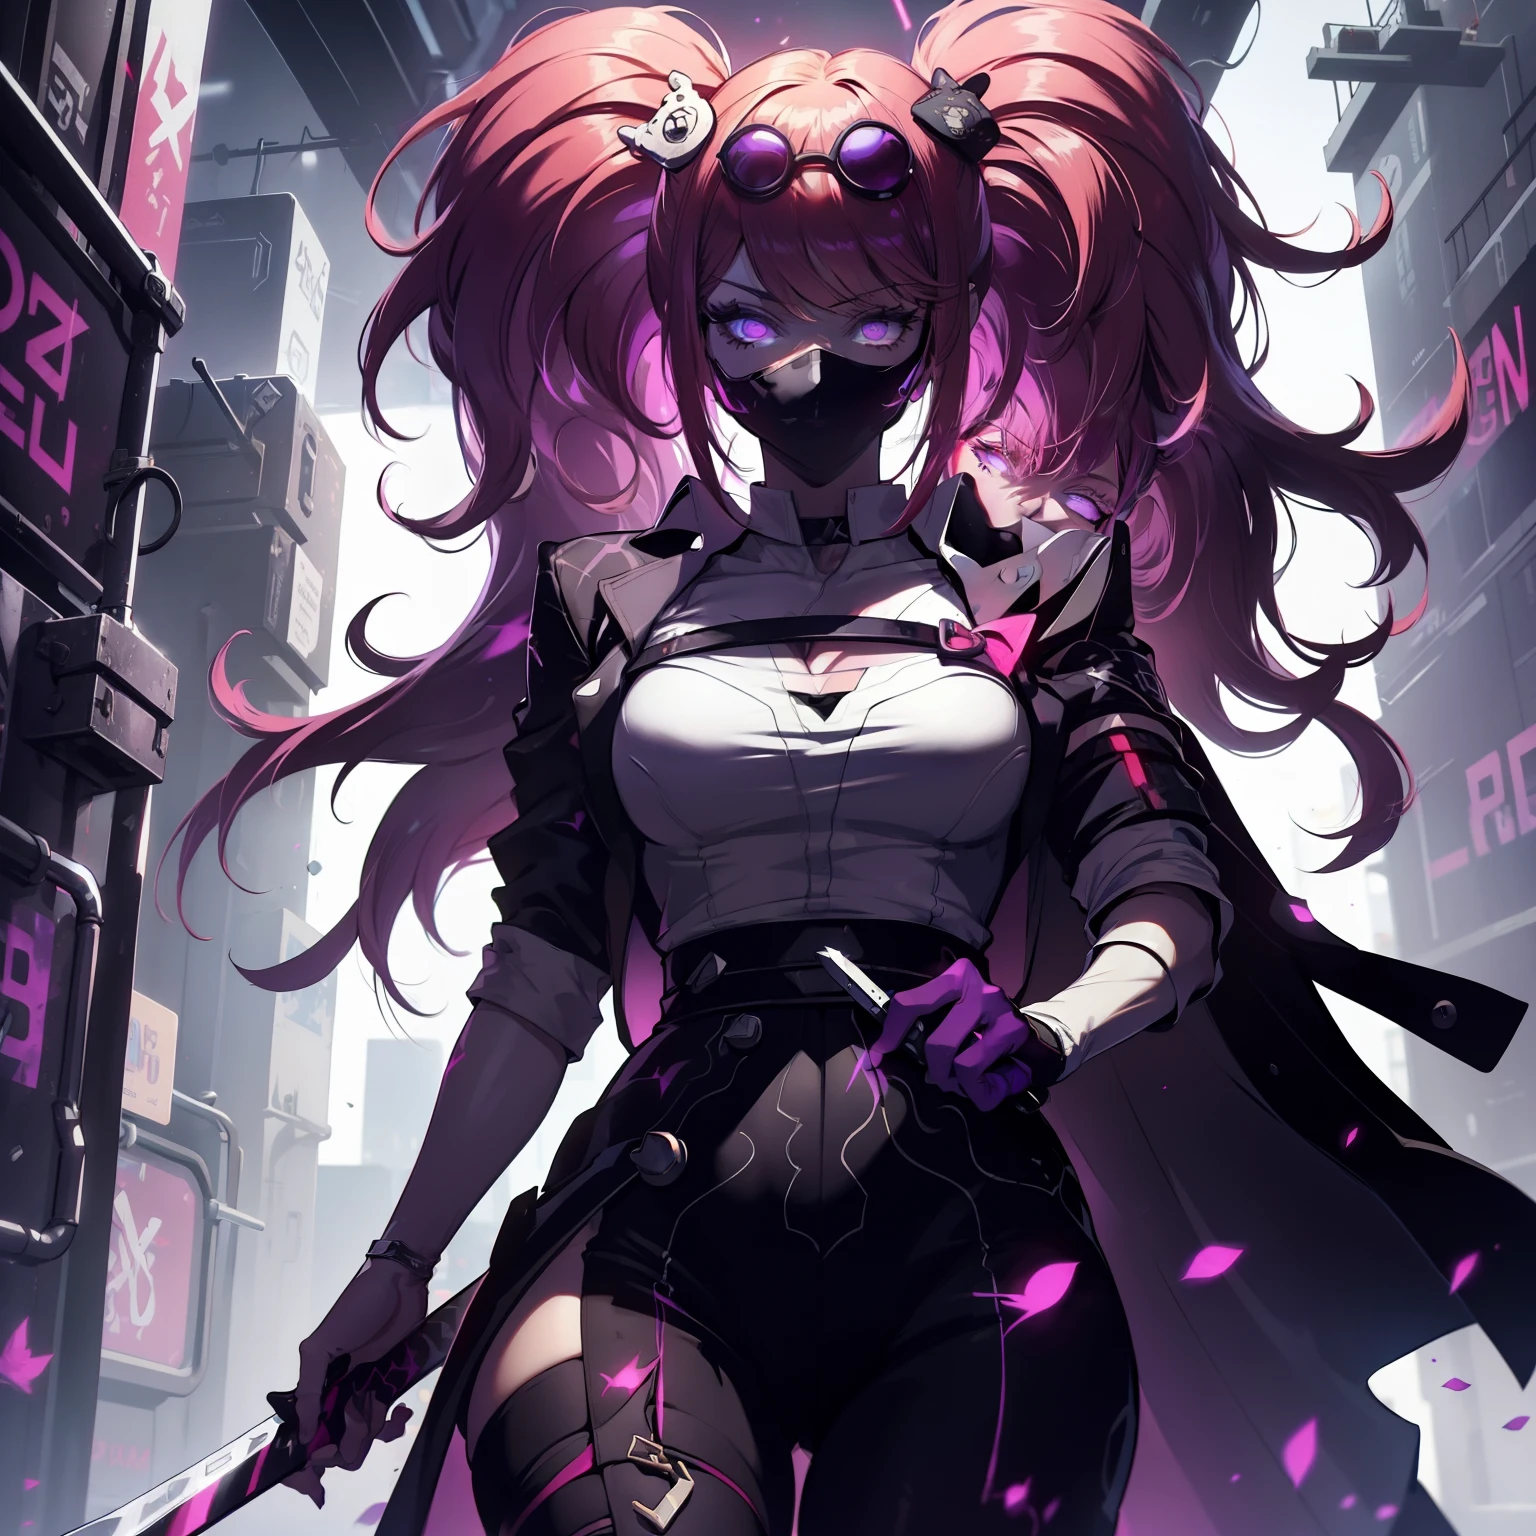 female , Un adolescente con cabello corto y blanco como la nieve , sporting a mysterious full-face black mask that has glowing purple eyes , vestido con una llamativa camisa roja y un largo abrigo negro, Deftly wielding a pair of dual long swords, one bright in vibrant red and the other hypnotically purple.. The scene unfolds against the backdrop of a dystopian cyberpunk city at night.., pulsing with neon lights and a futuristic aura, All rendered in stunning high-resolution 8K quality